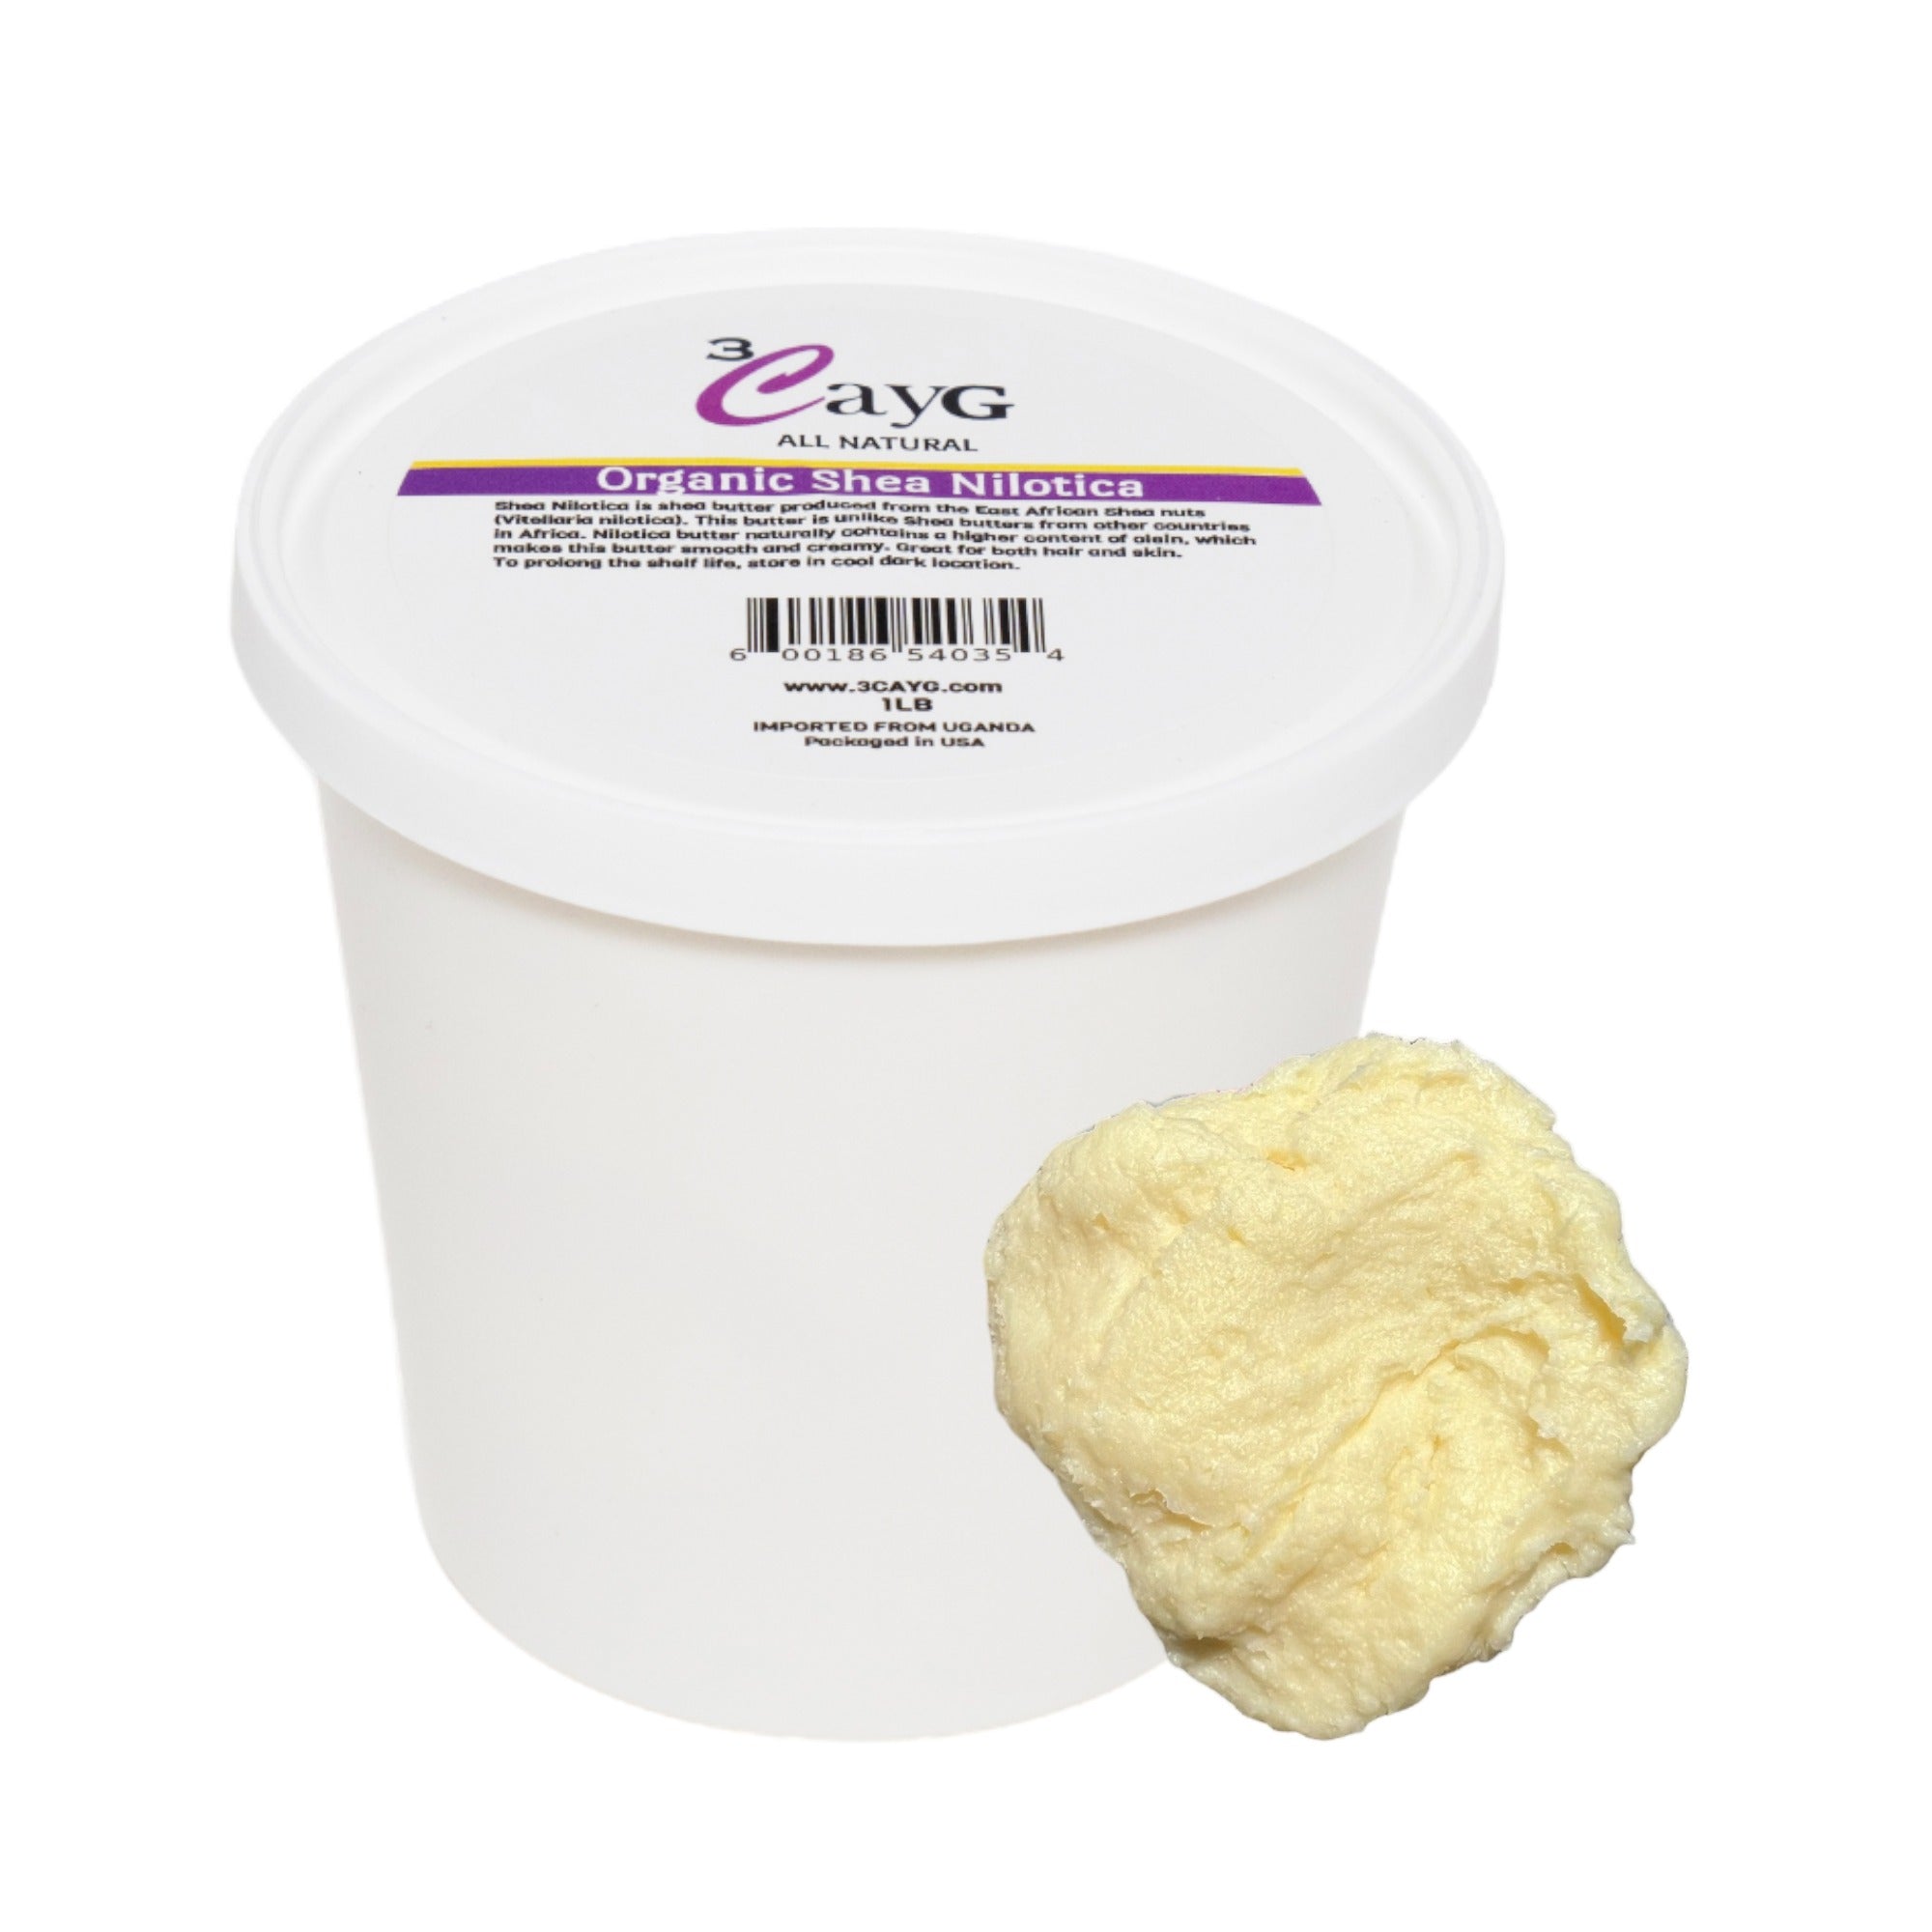 1 Pound Of Shea Butter For Soap Making, Natural And Shea Butter